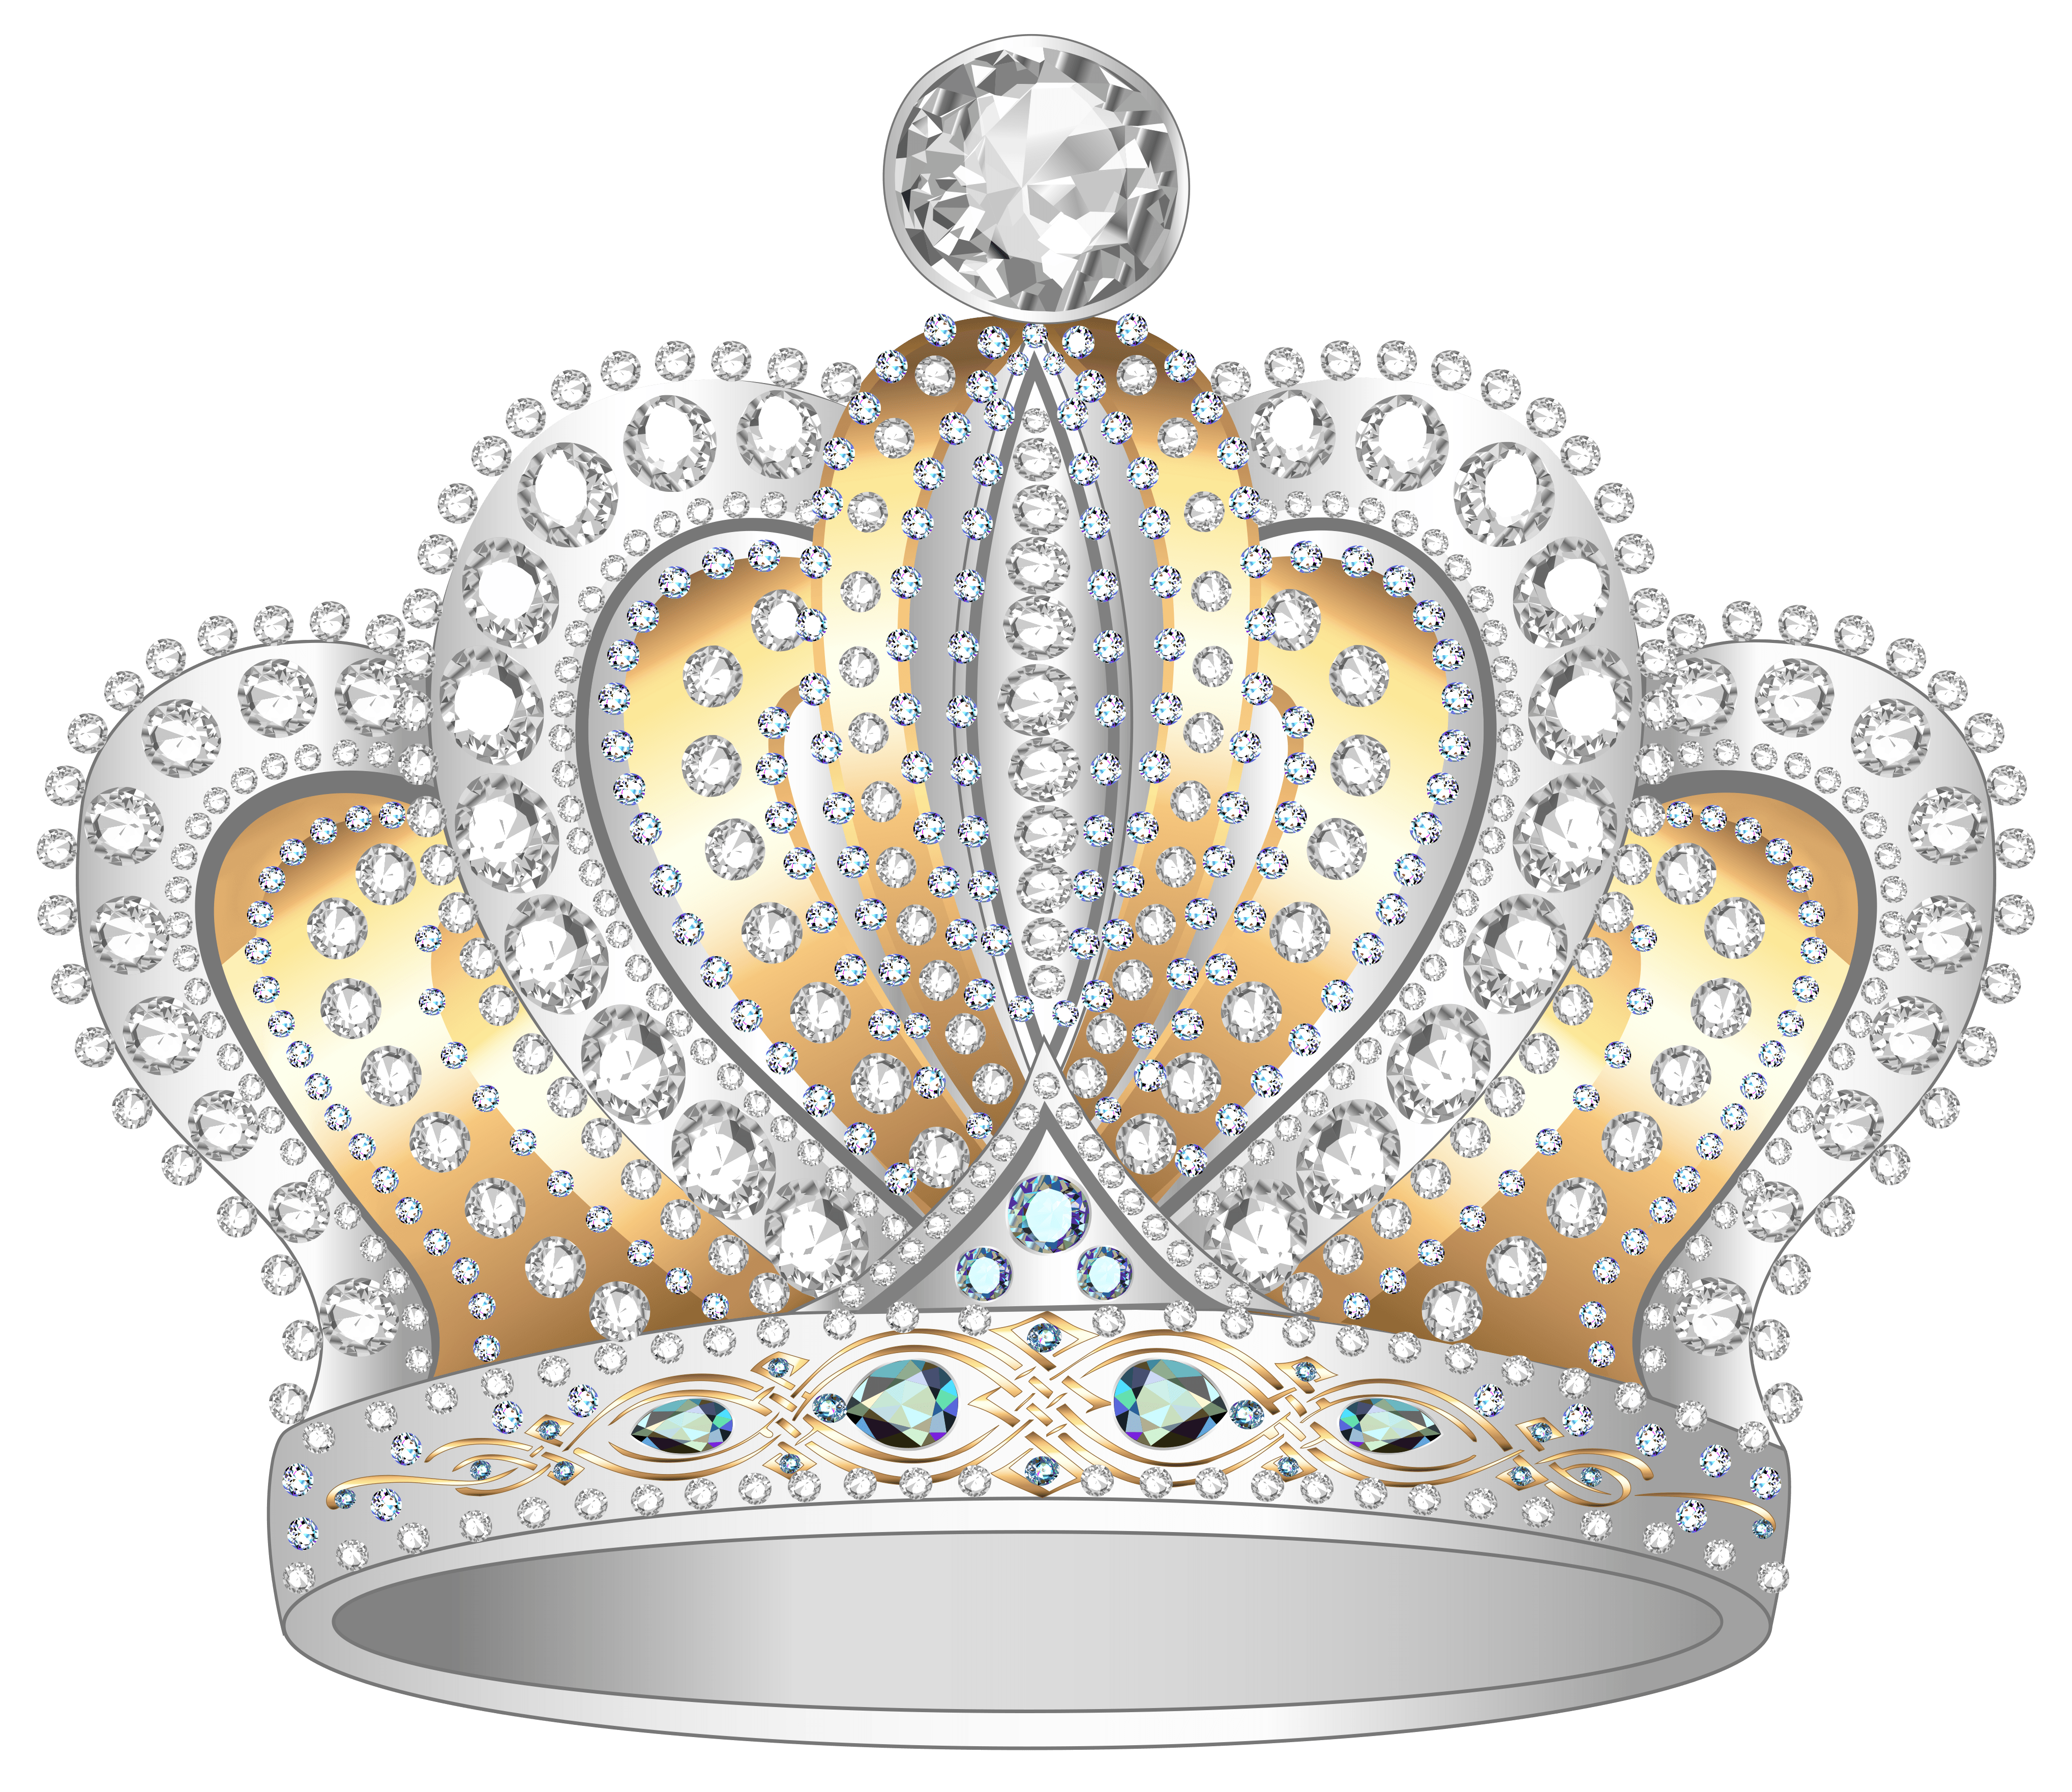 Silver Diamond Crown Logo - Silver Gold Diamond Crown PNG Clipart Image | Gallery Yopriceville ...